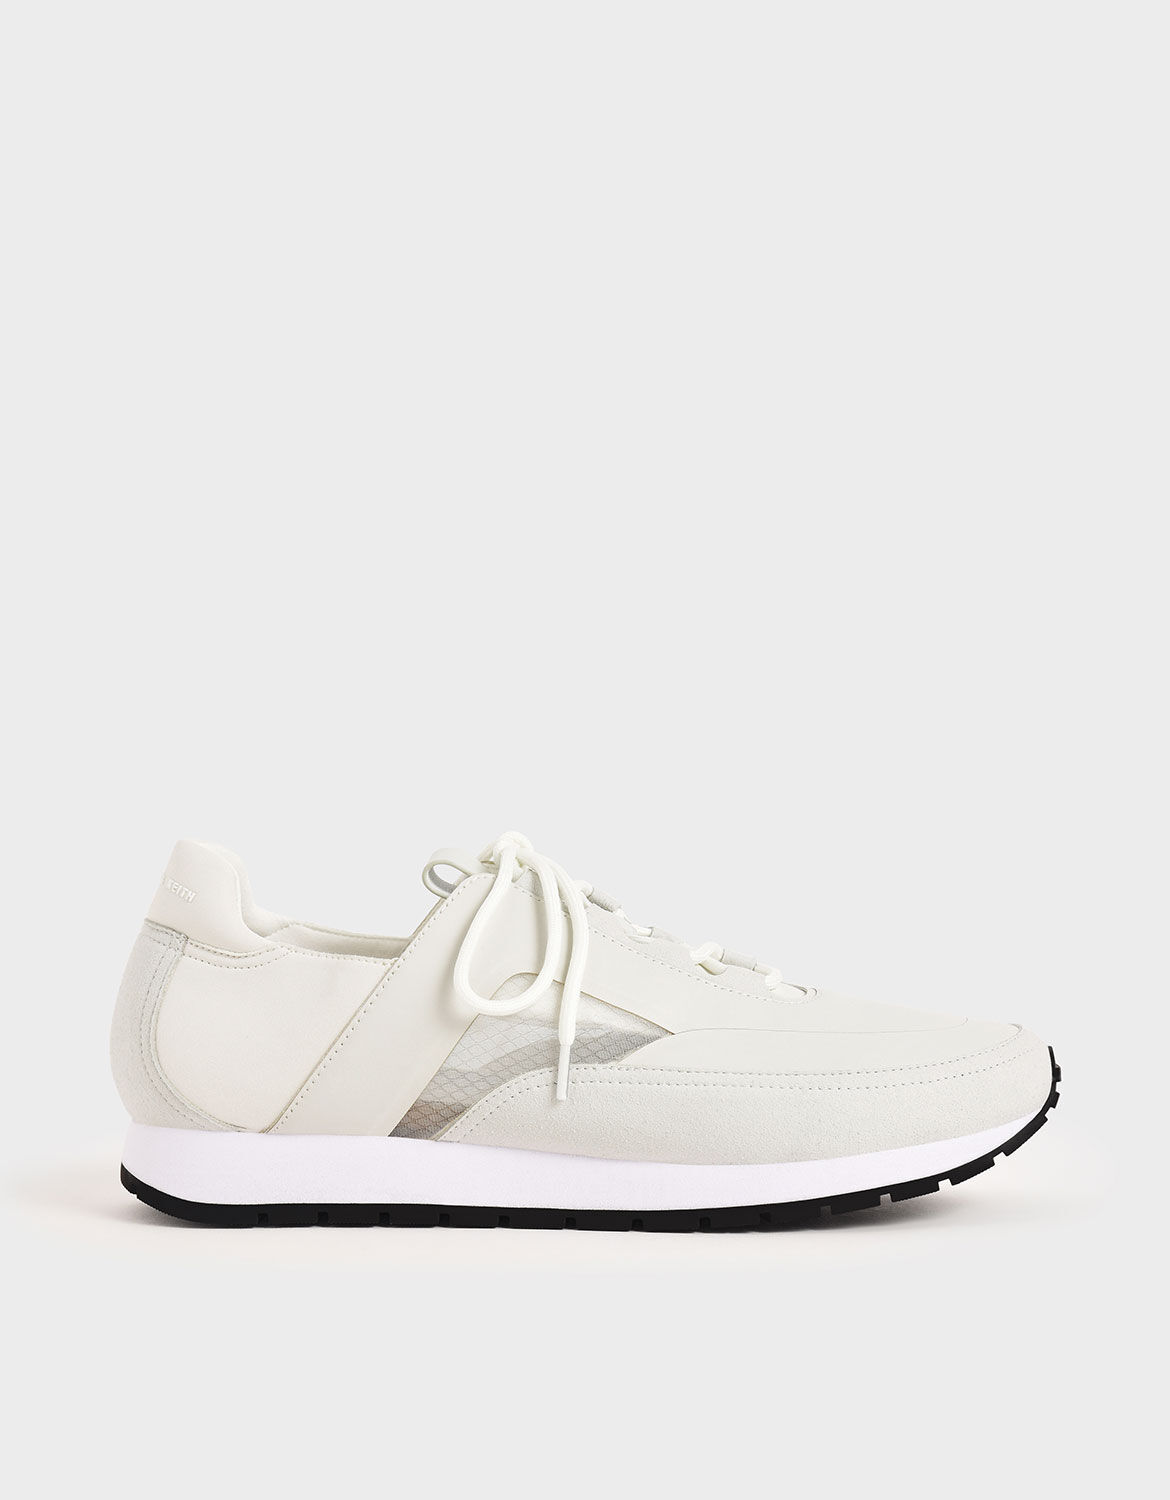 White Lace-Up Trainers | CHARLES \u0026 KEITH SG